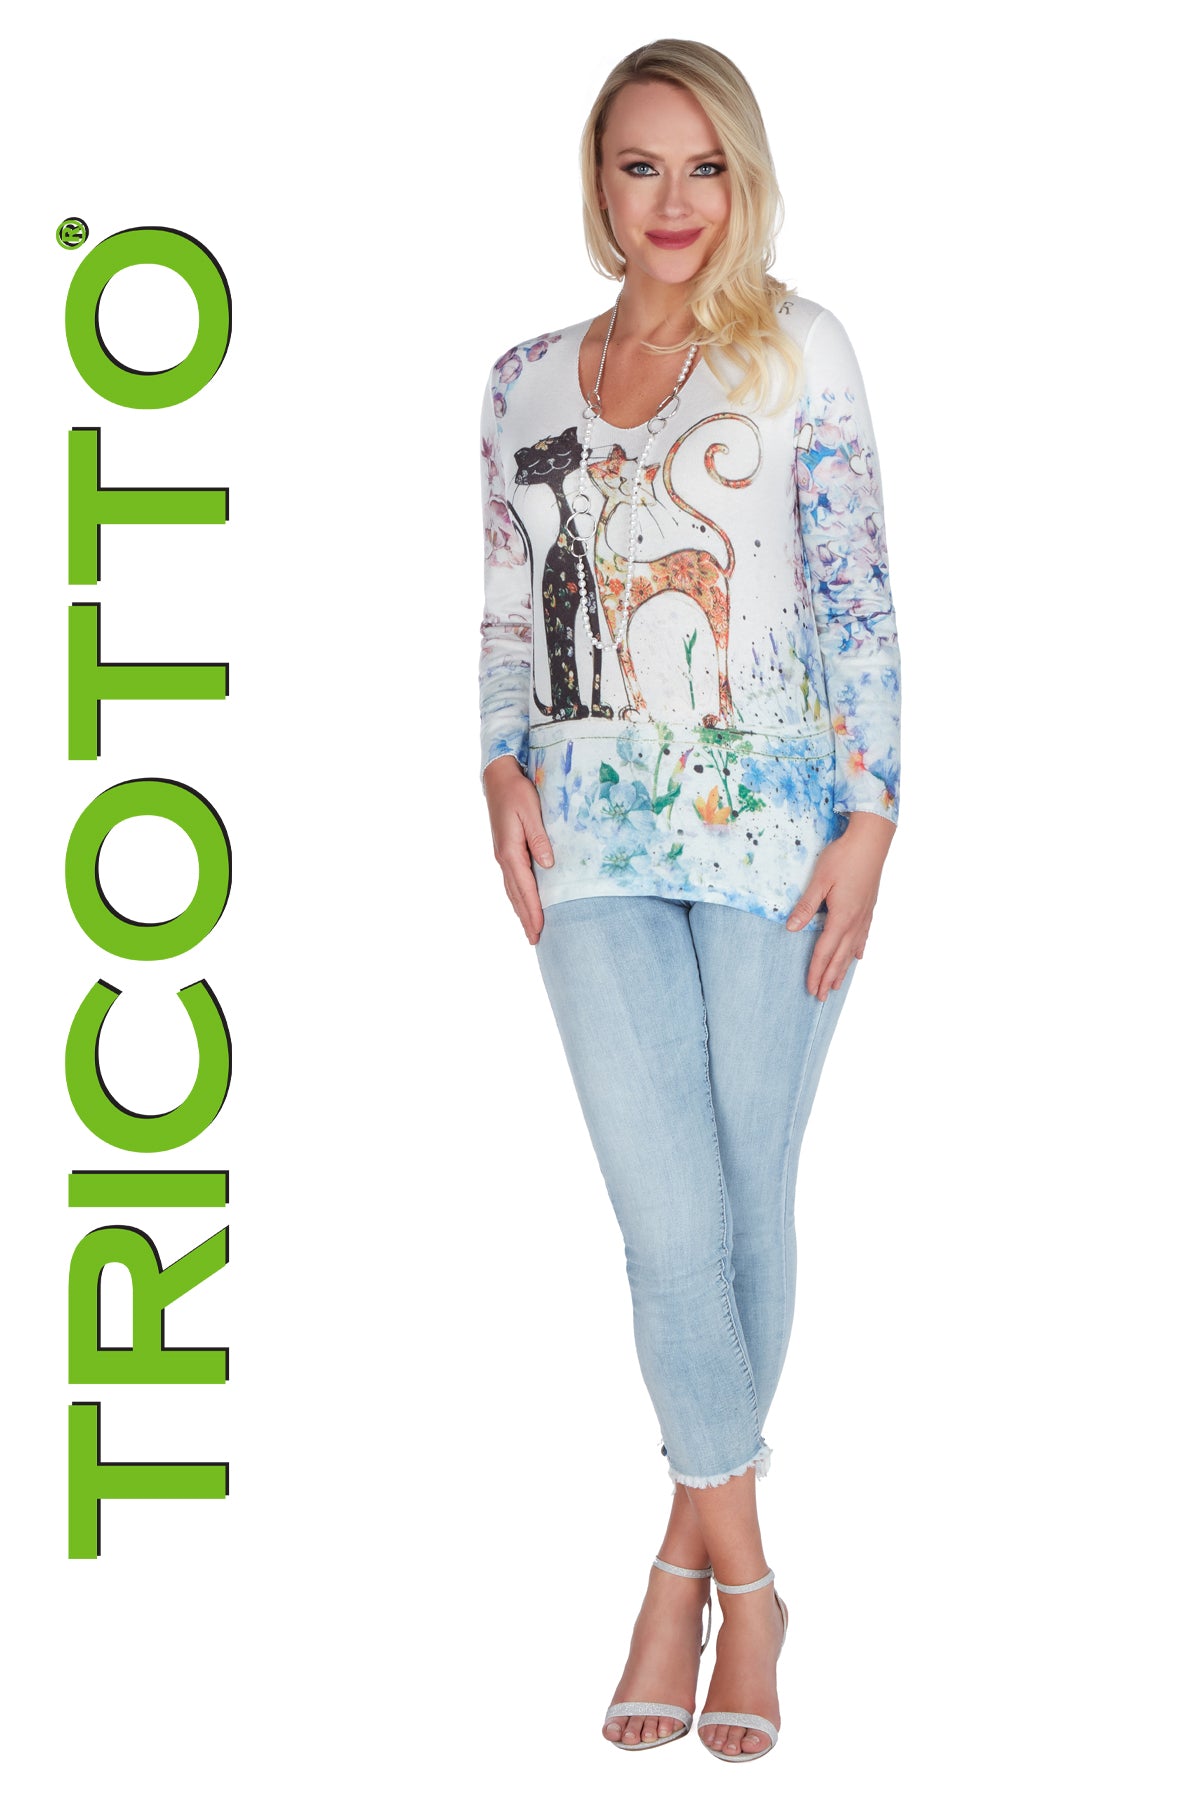 Tricotto Clothing-Tricotto Spring 2022-Tricotto Sweaters-Tricotto Jeans- Tricotto Online Shop – Marianne Style